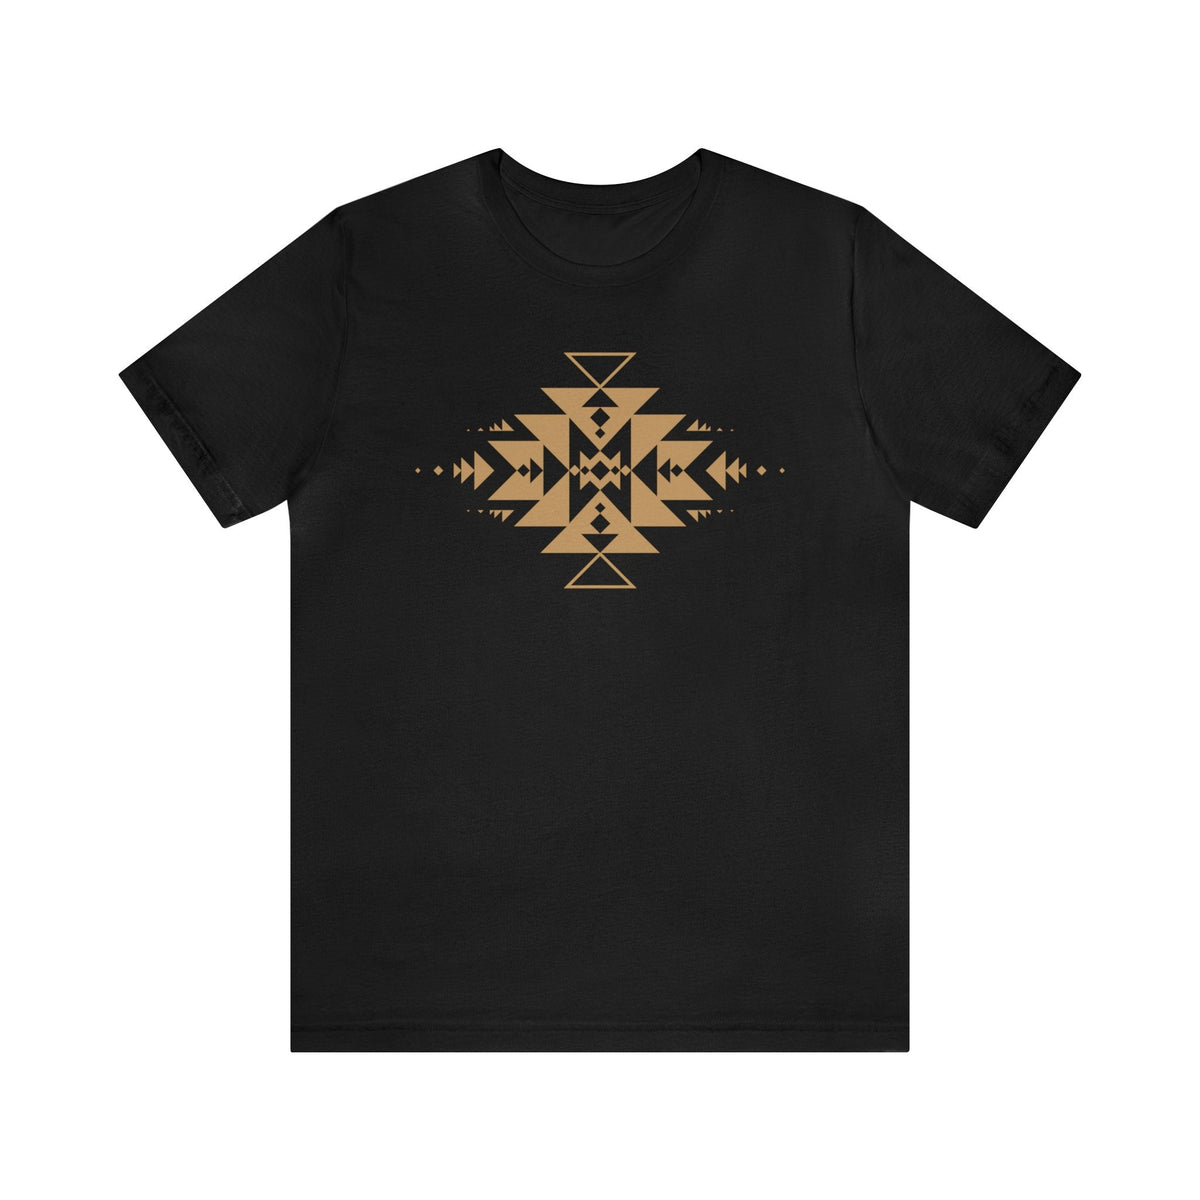 Women's Western Aztec T-shirt | Southwestern Style Top | Country Graphic Tee T-Shirt TheFringeCultureCollective